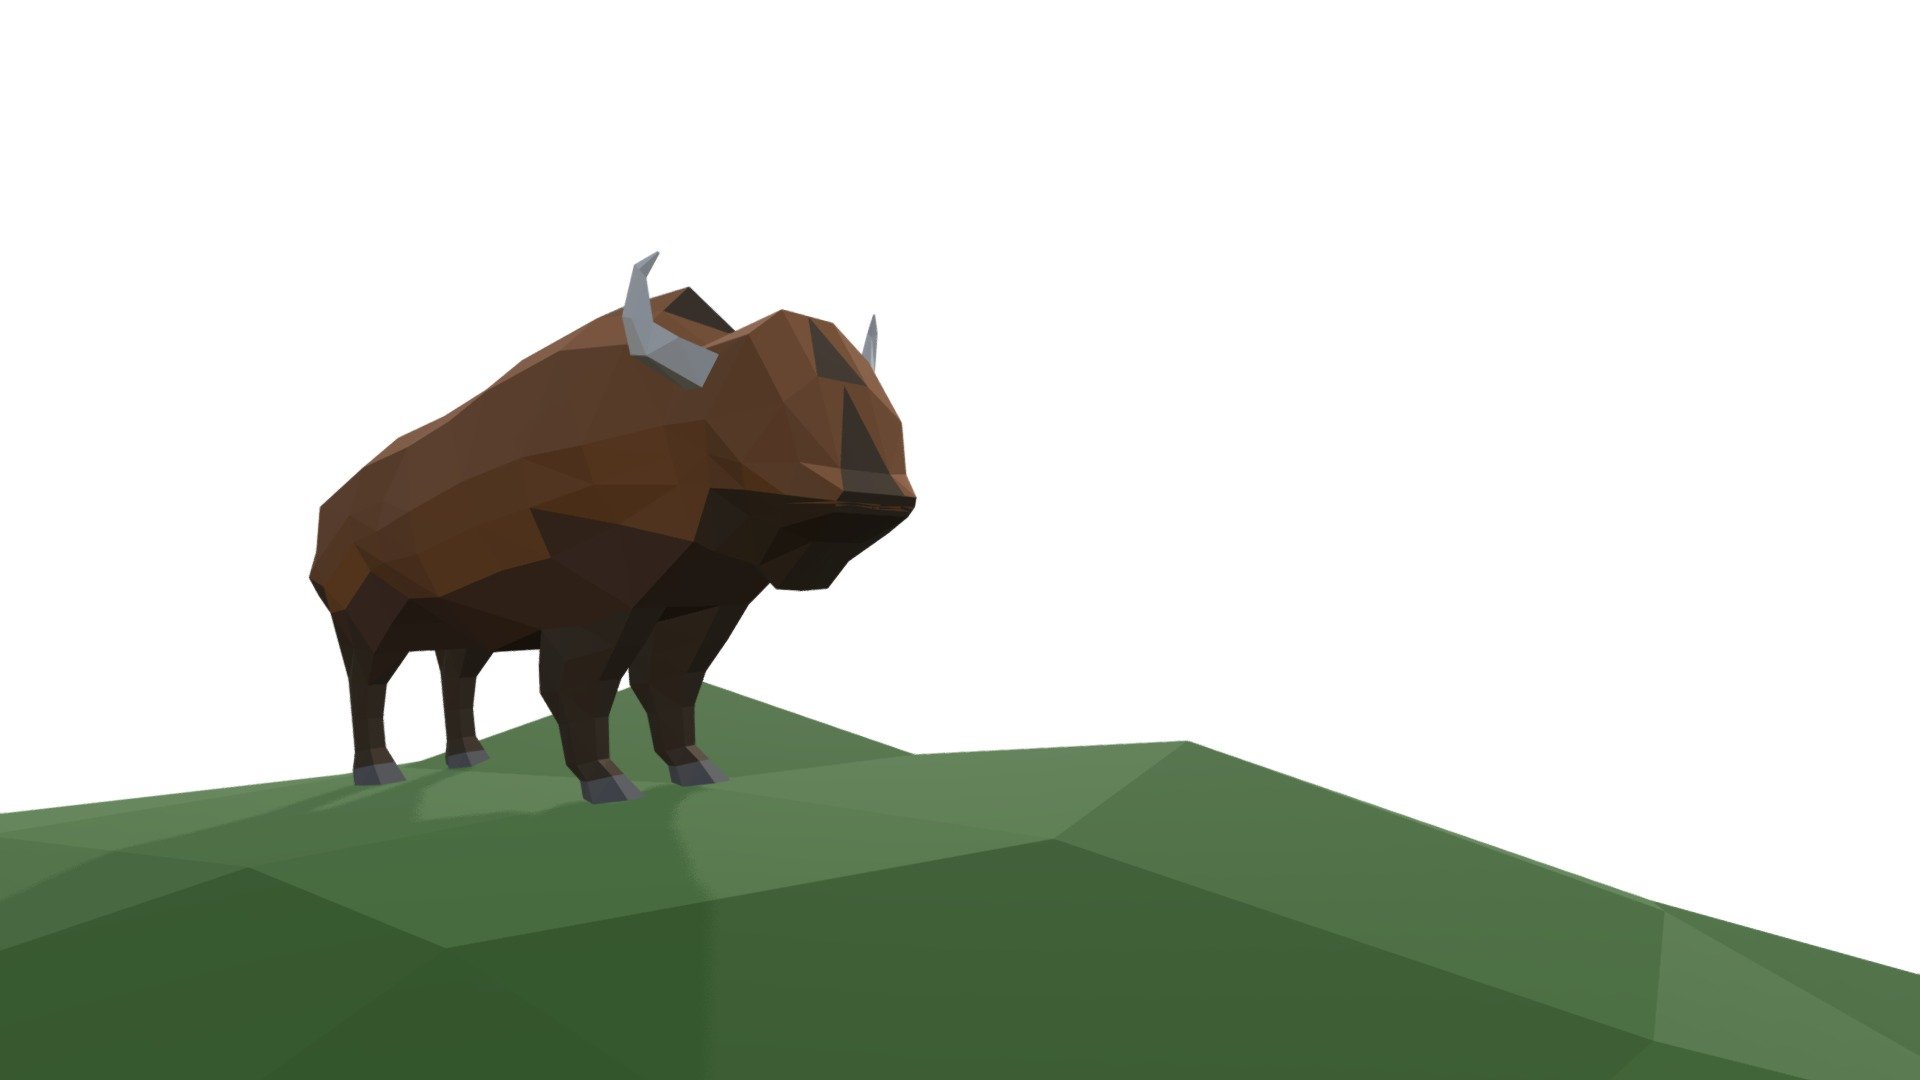 Low poly American Buffalo. Made with Blender @ Aberystwyth Games Hub. 
www.games-hub.co.uk

Games Hub is a West Wales based training center providing industry standard courses in games development, 3d modelling and After Effects. 

Our instructors never stop their learning process too. They’re always practised with the very latest tools and techniques 3d model